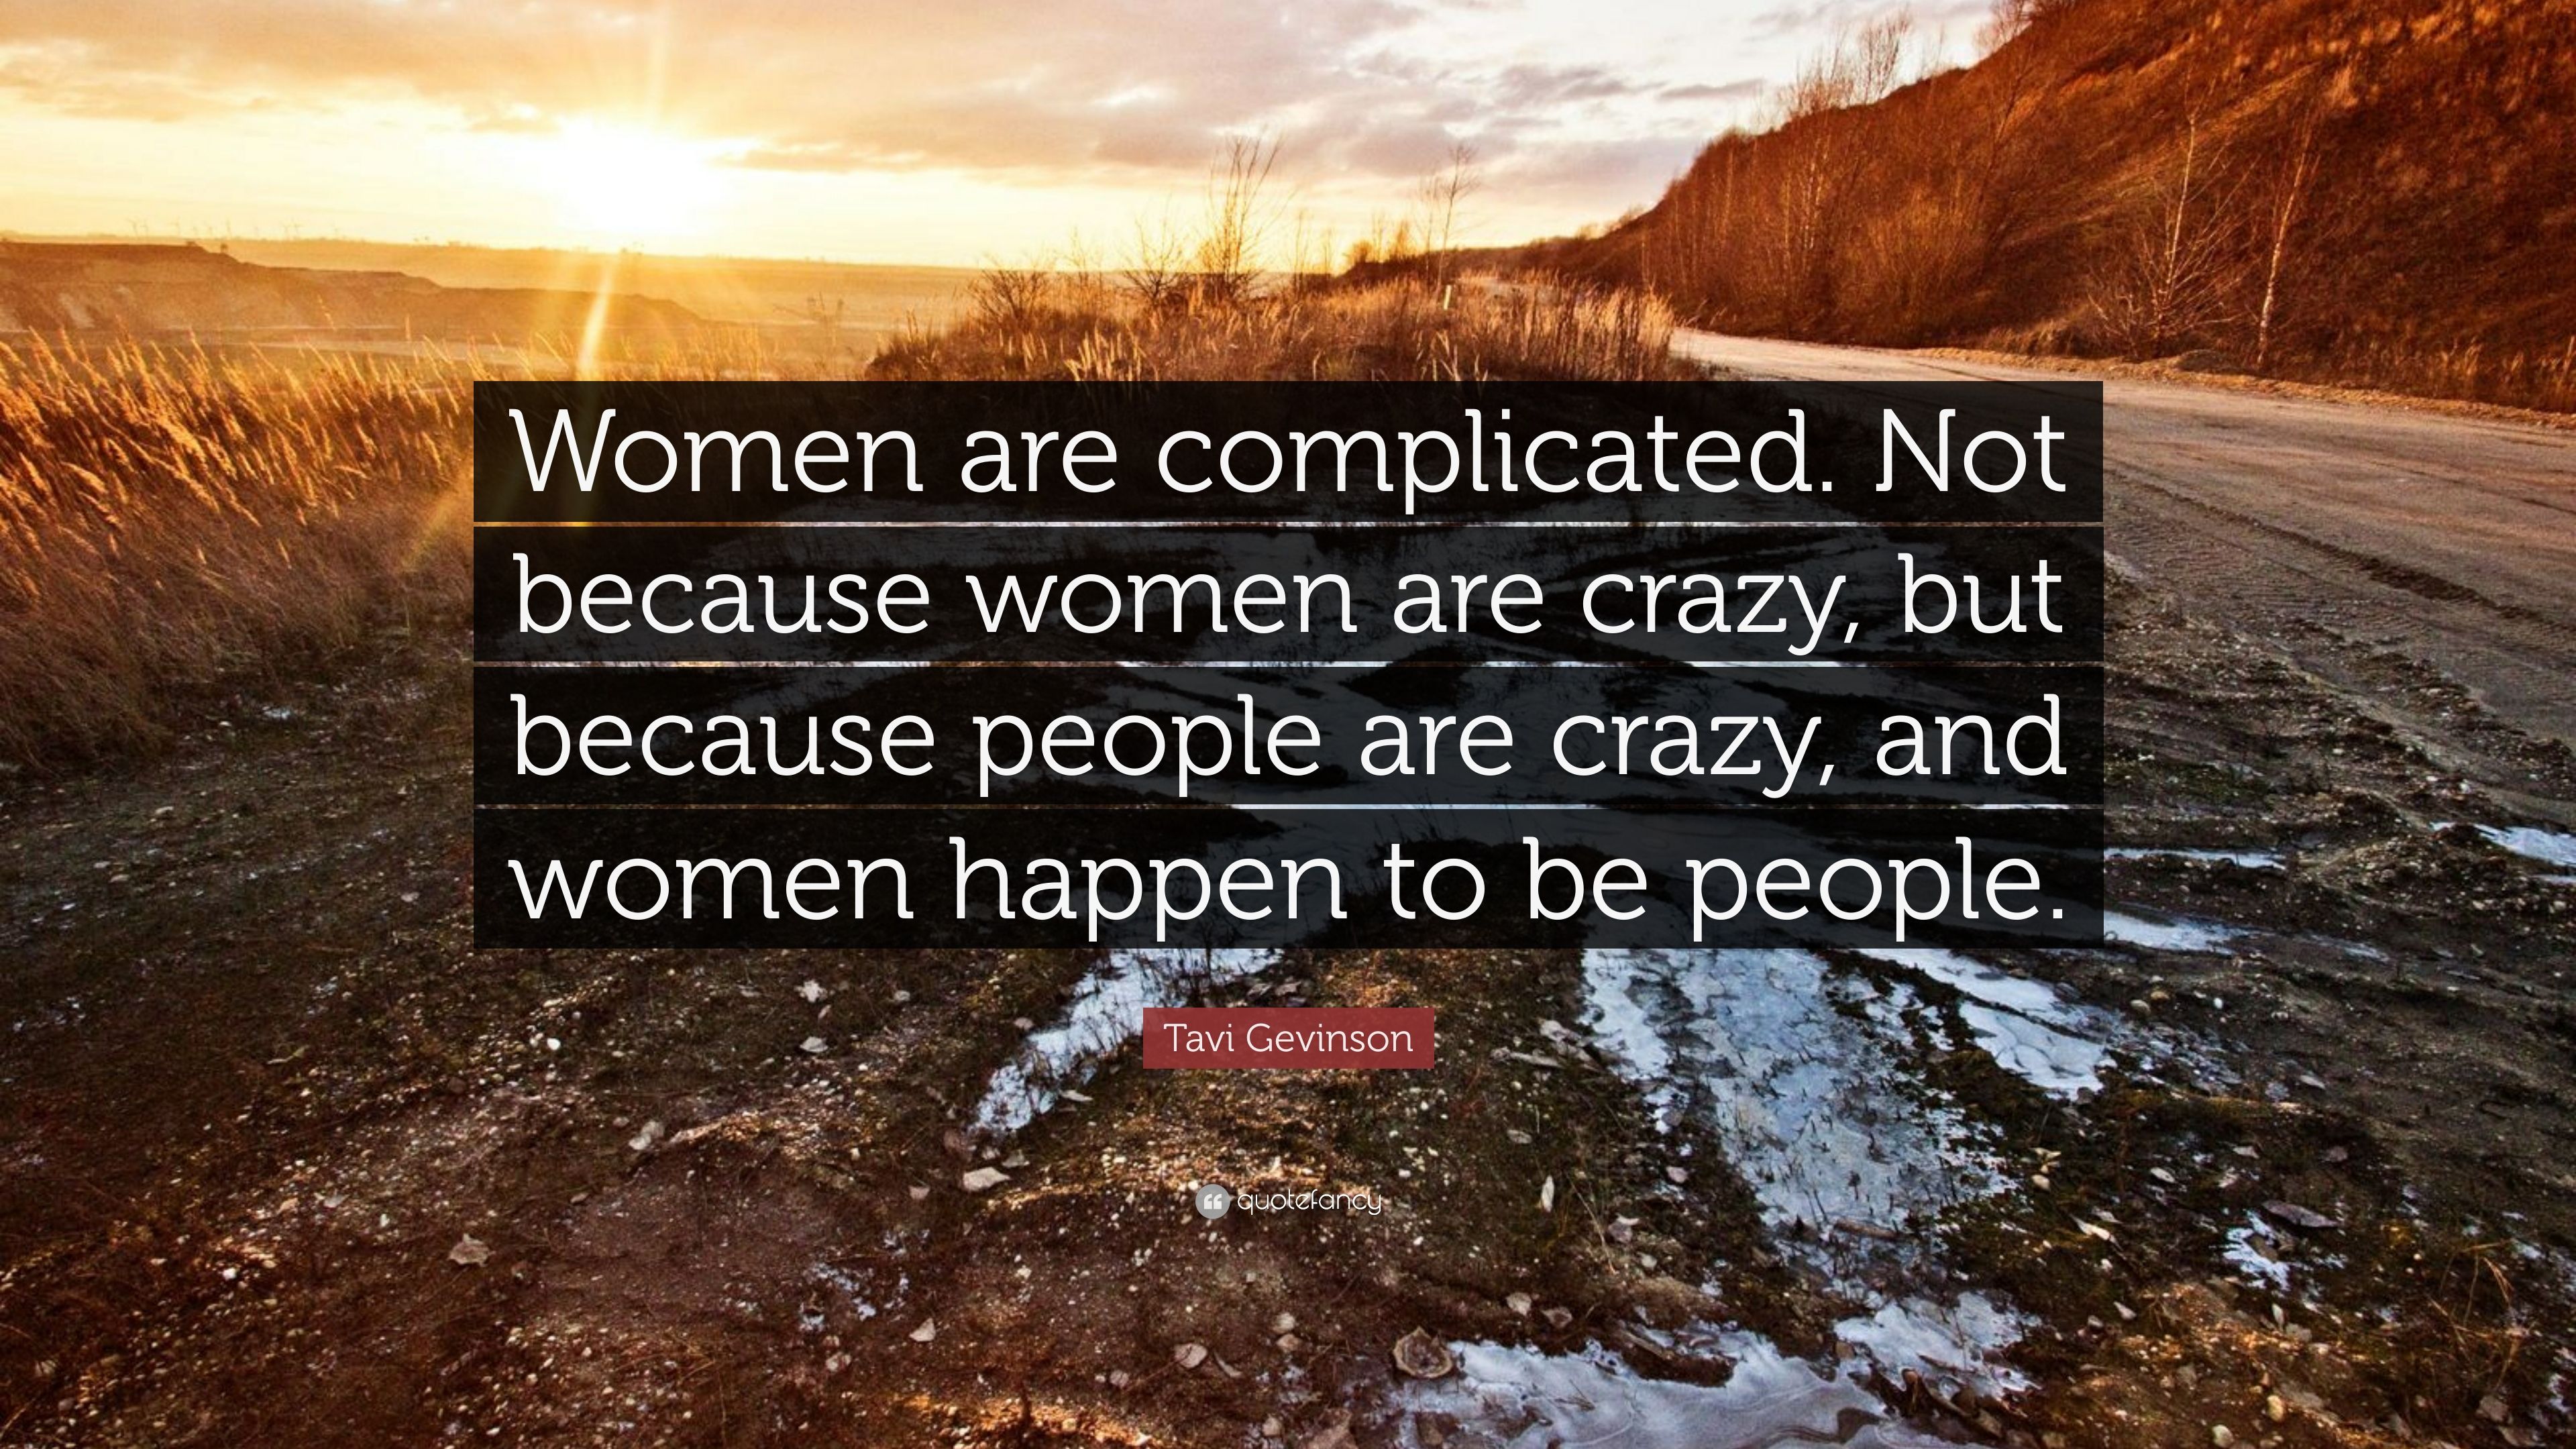 Tavi Gevinson Quote: “Women are complicated. Not because women are